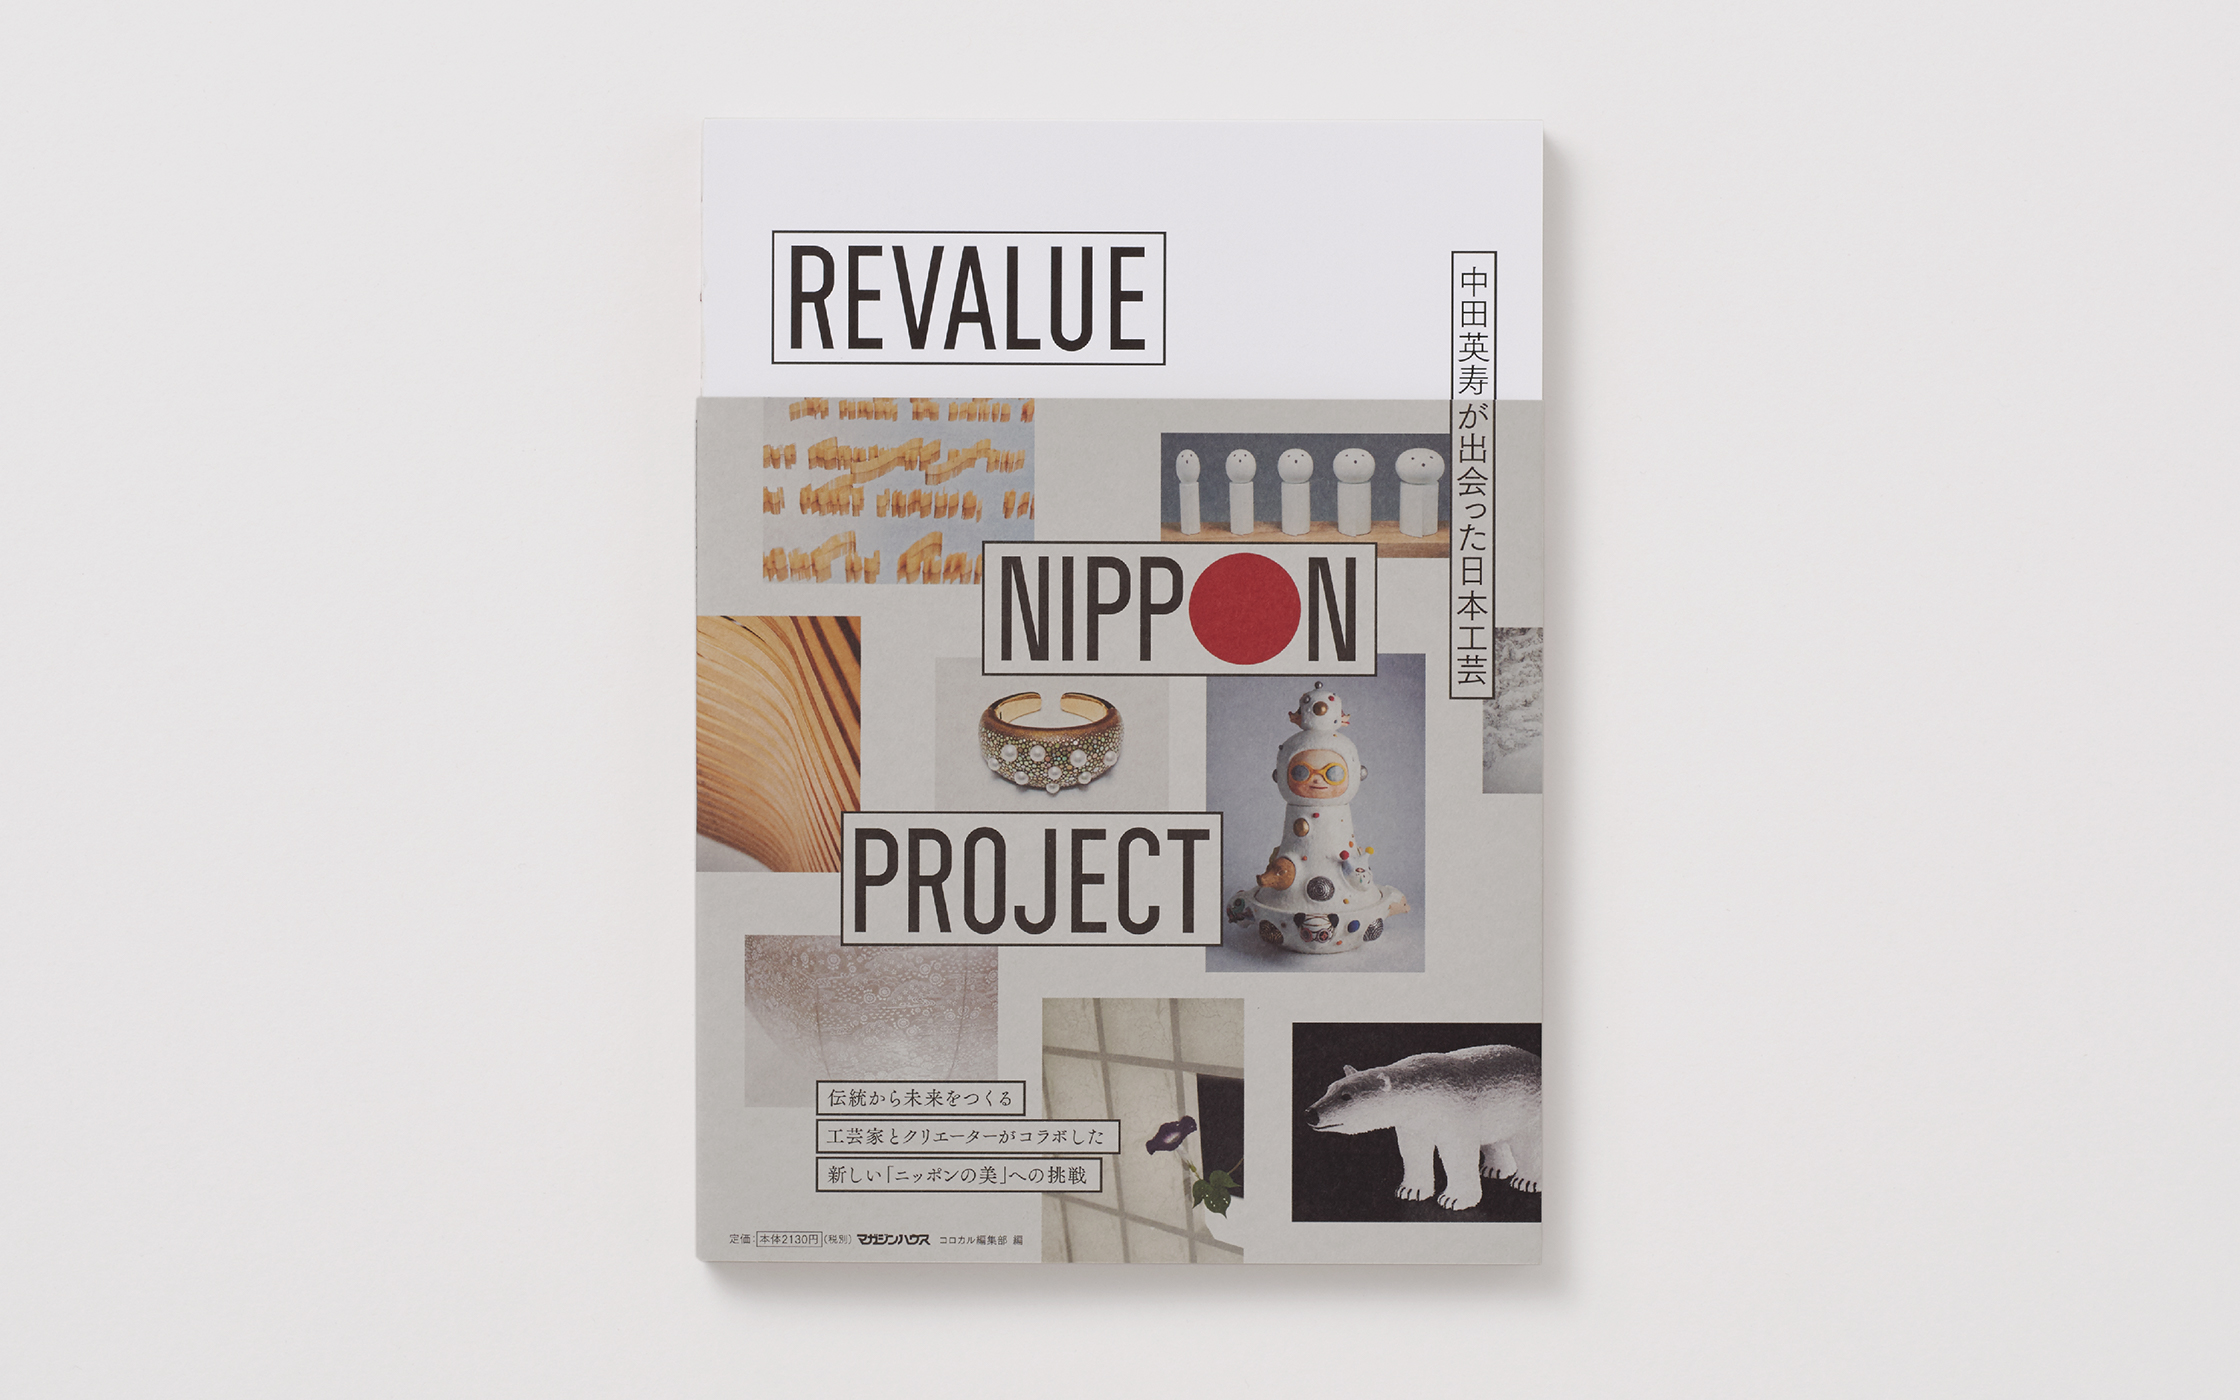 REVALUE NIPPON PROJECT Exhibition Catalog